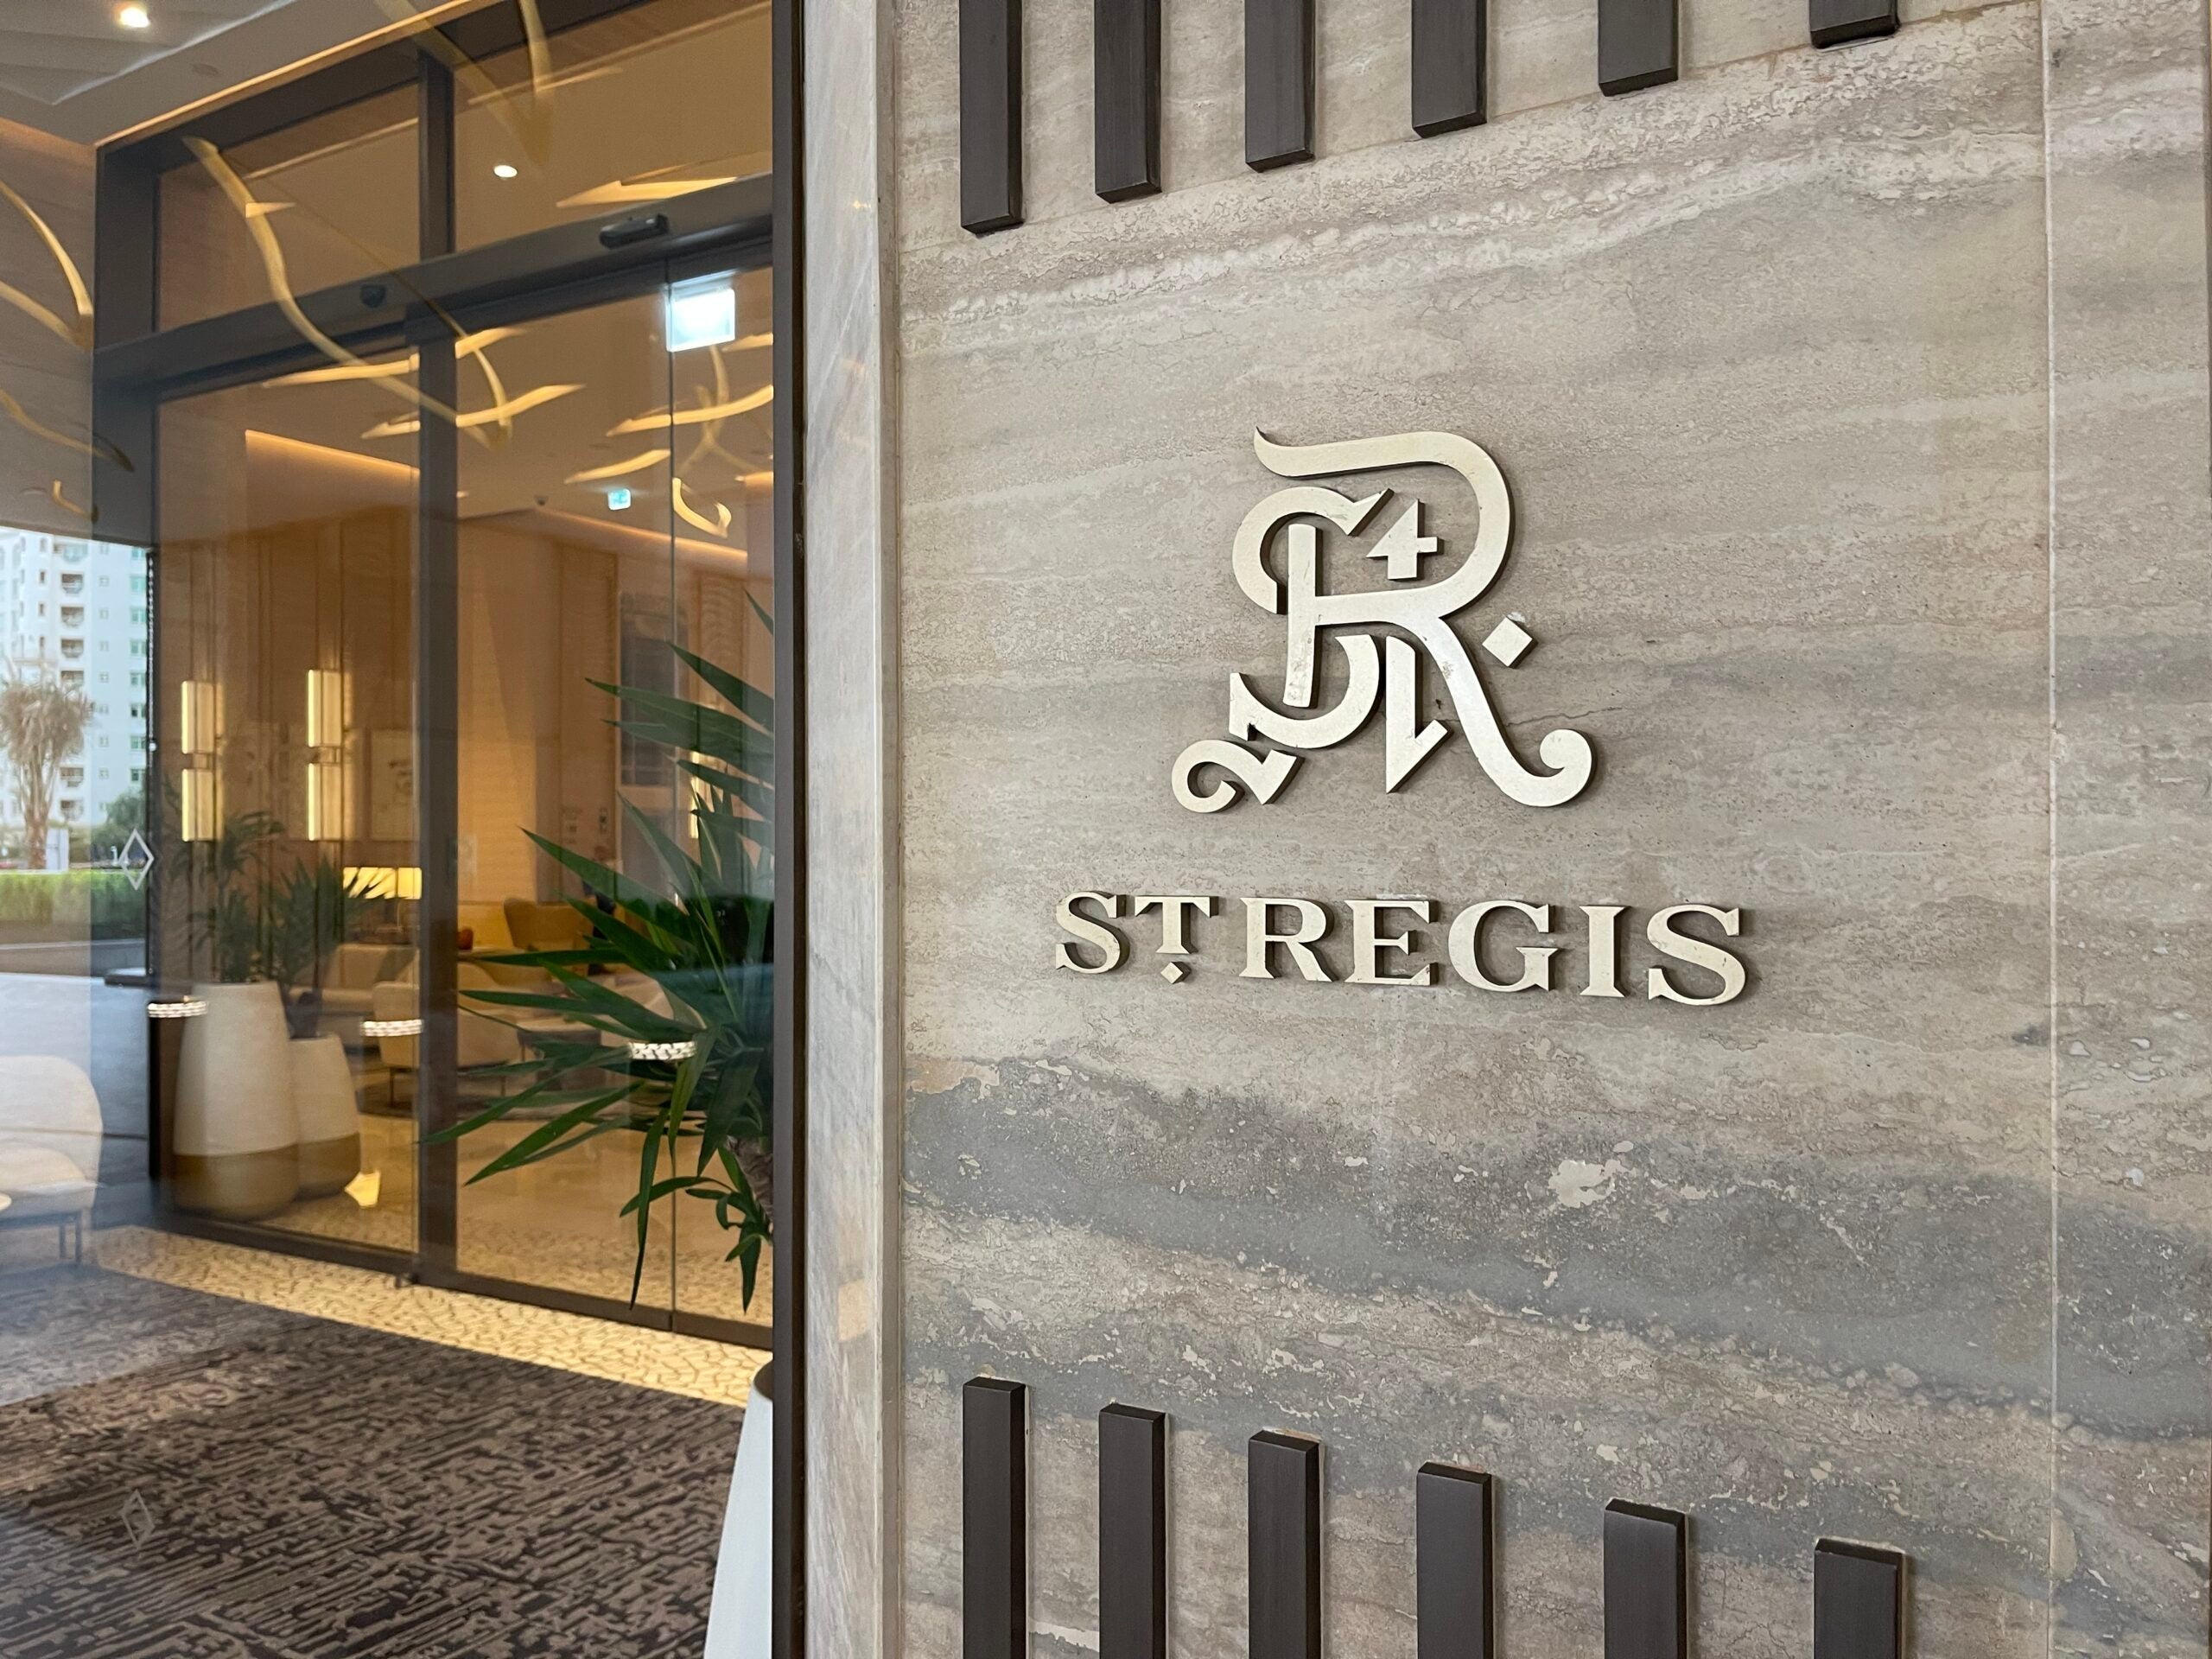 Why St. Regis is the perfect Marriott brand for Platinum members